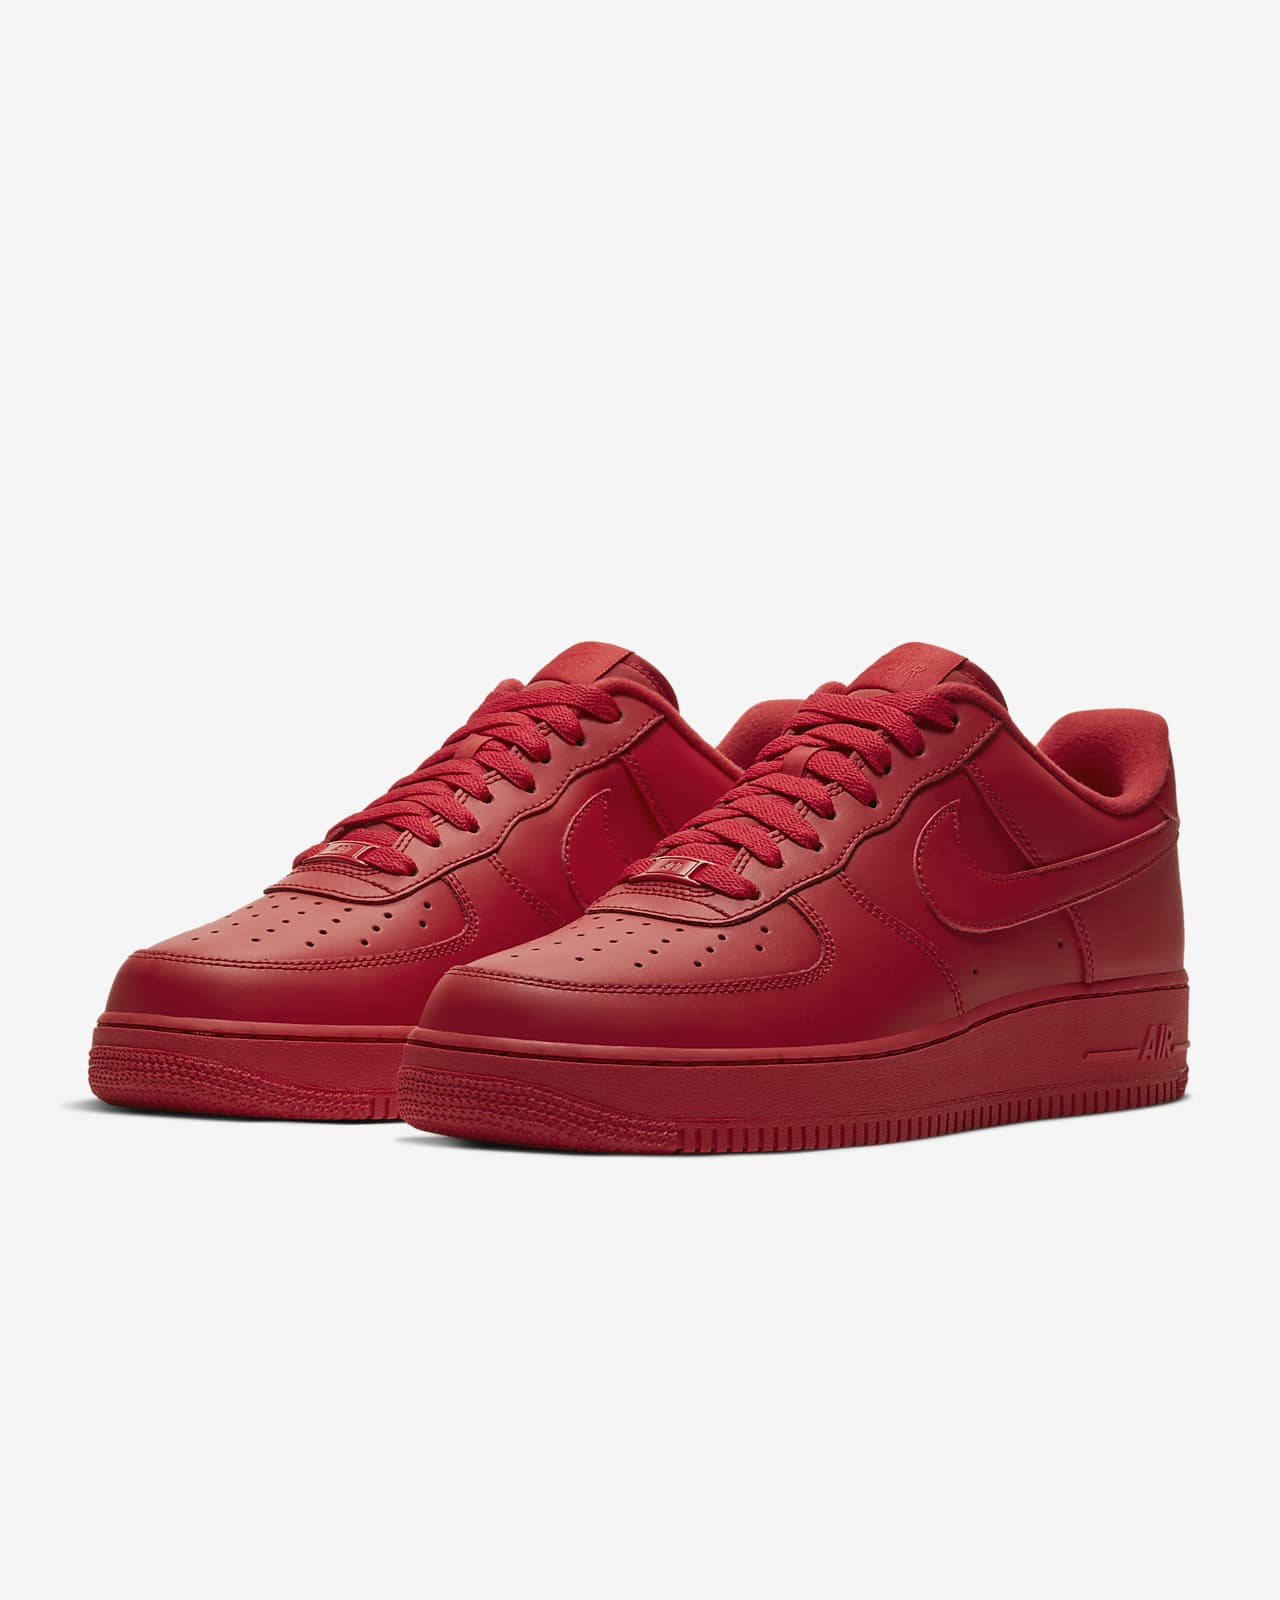 all red air force ones